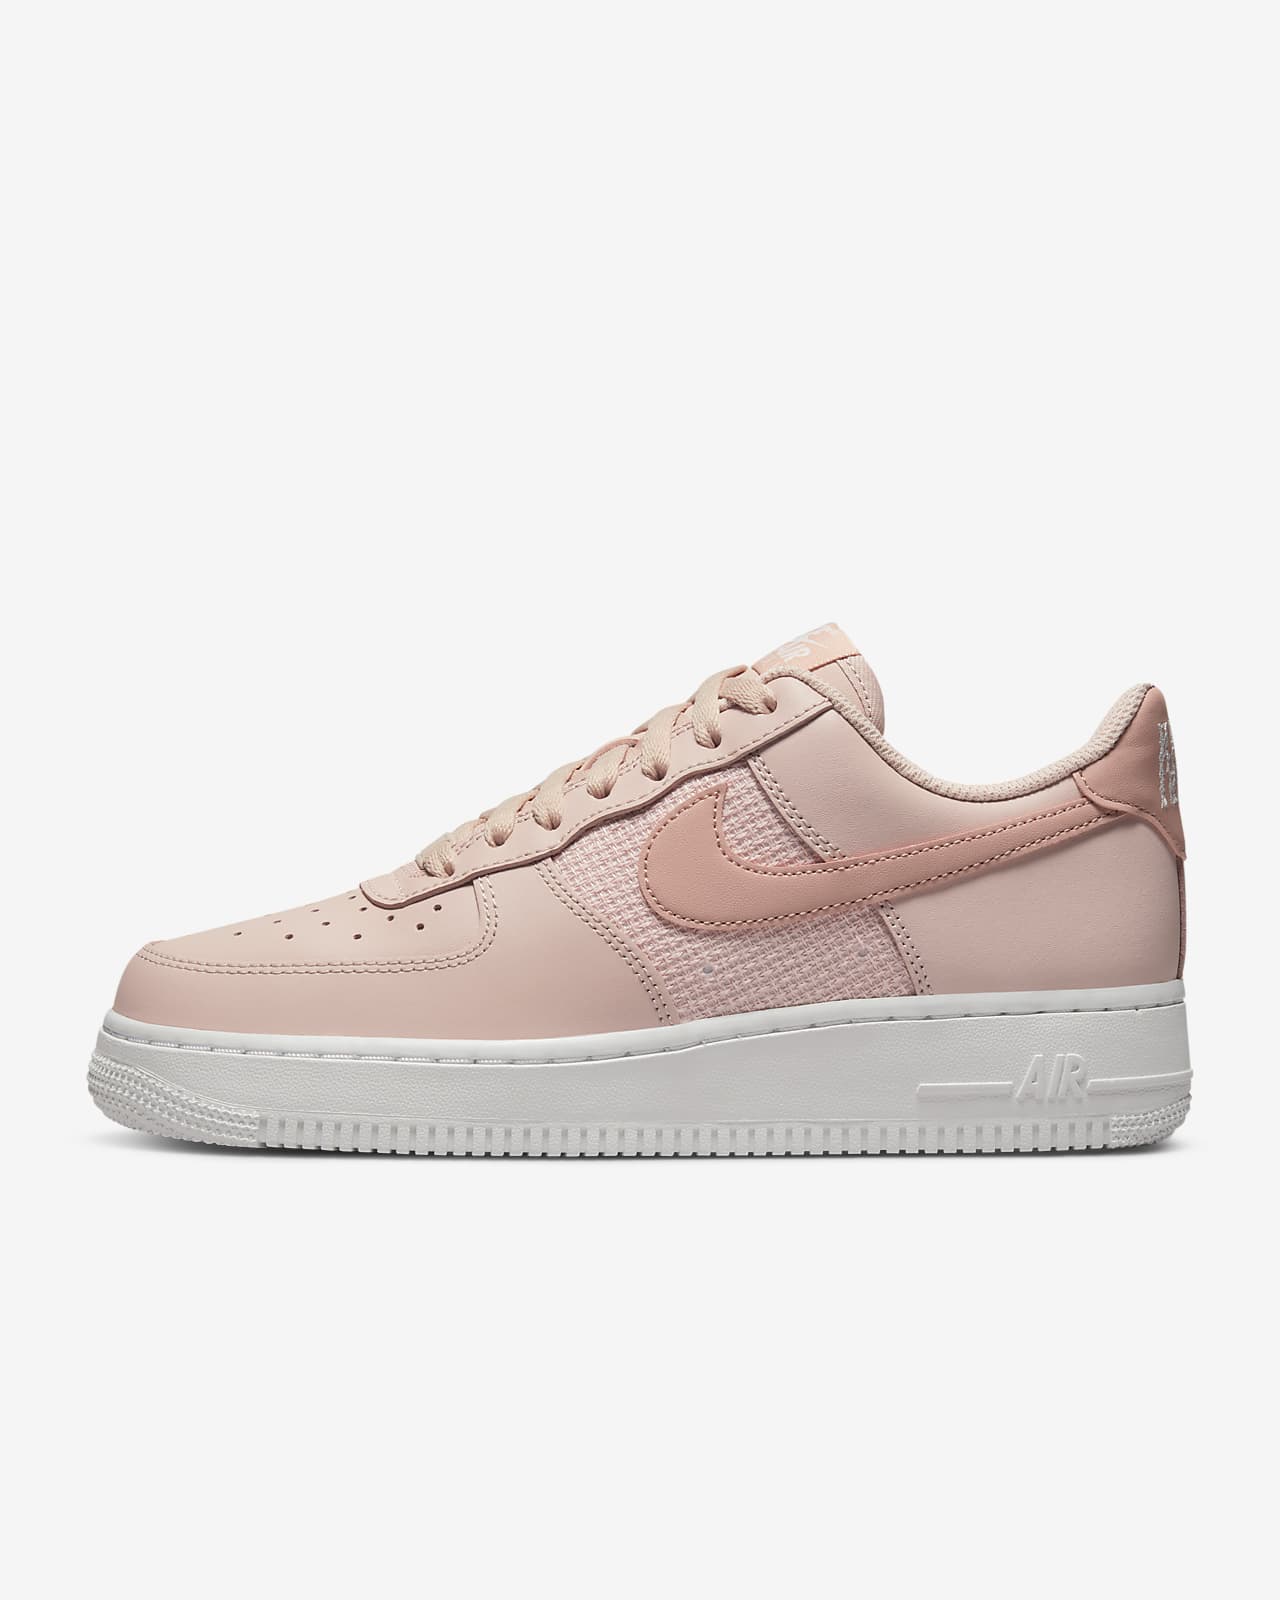 Nike Air Force 1 '07 ESS Women's Shoes